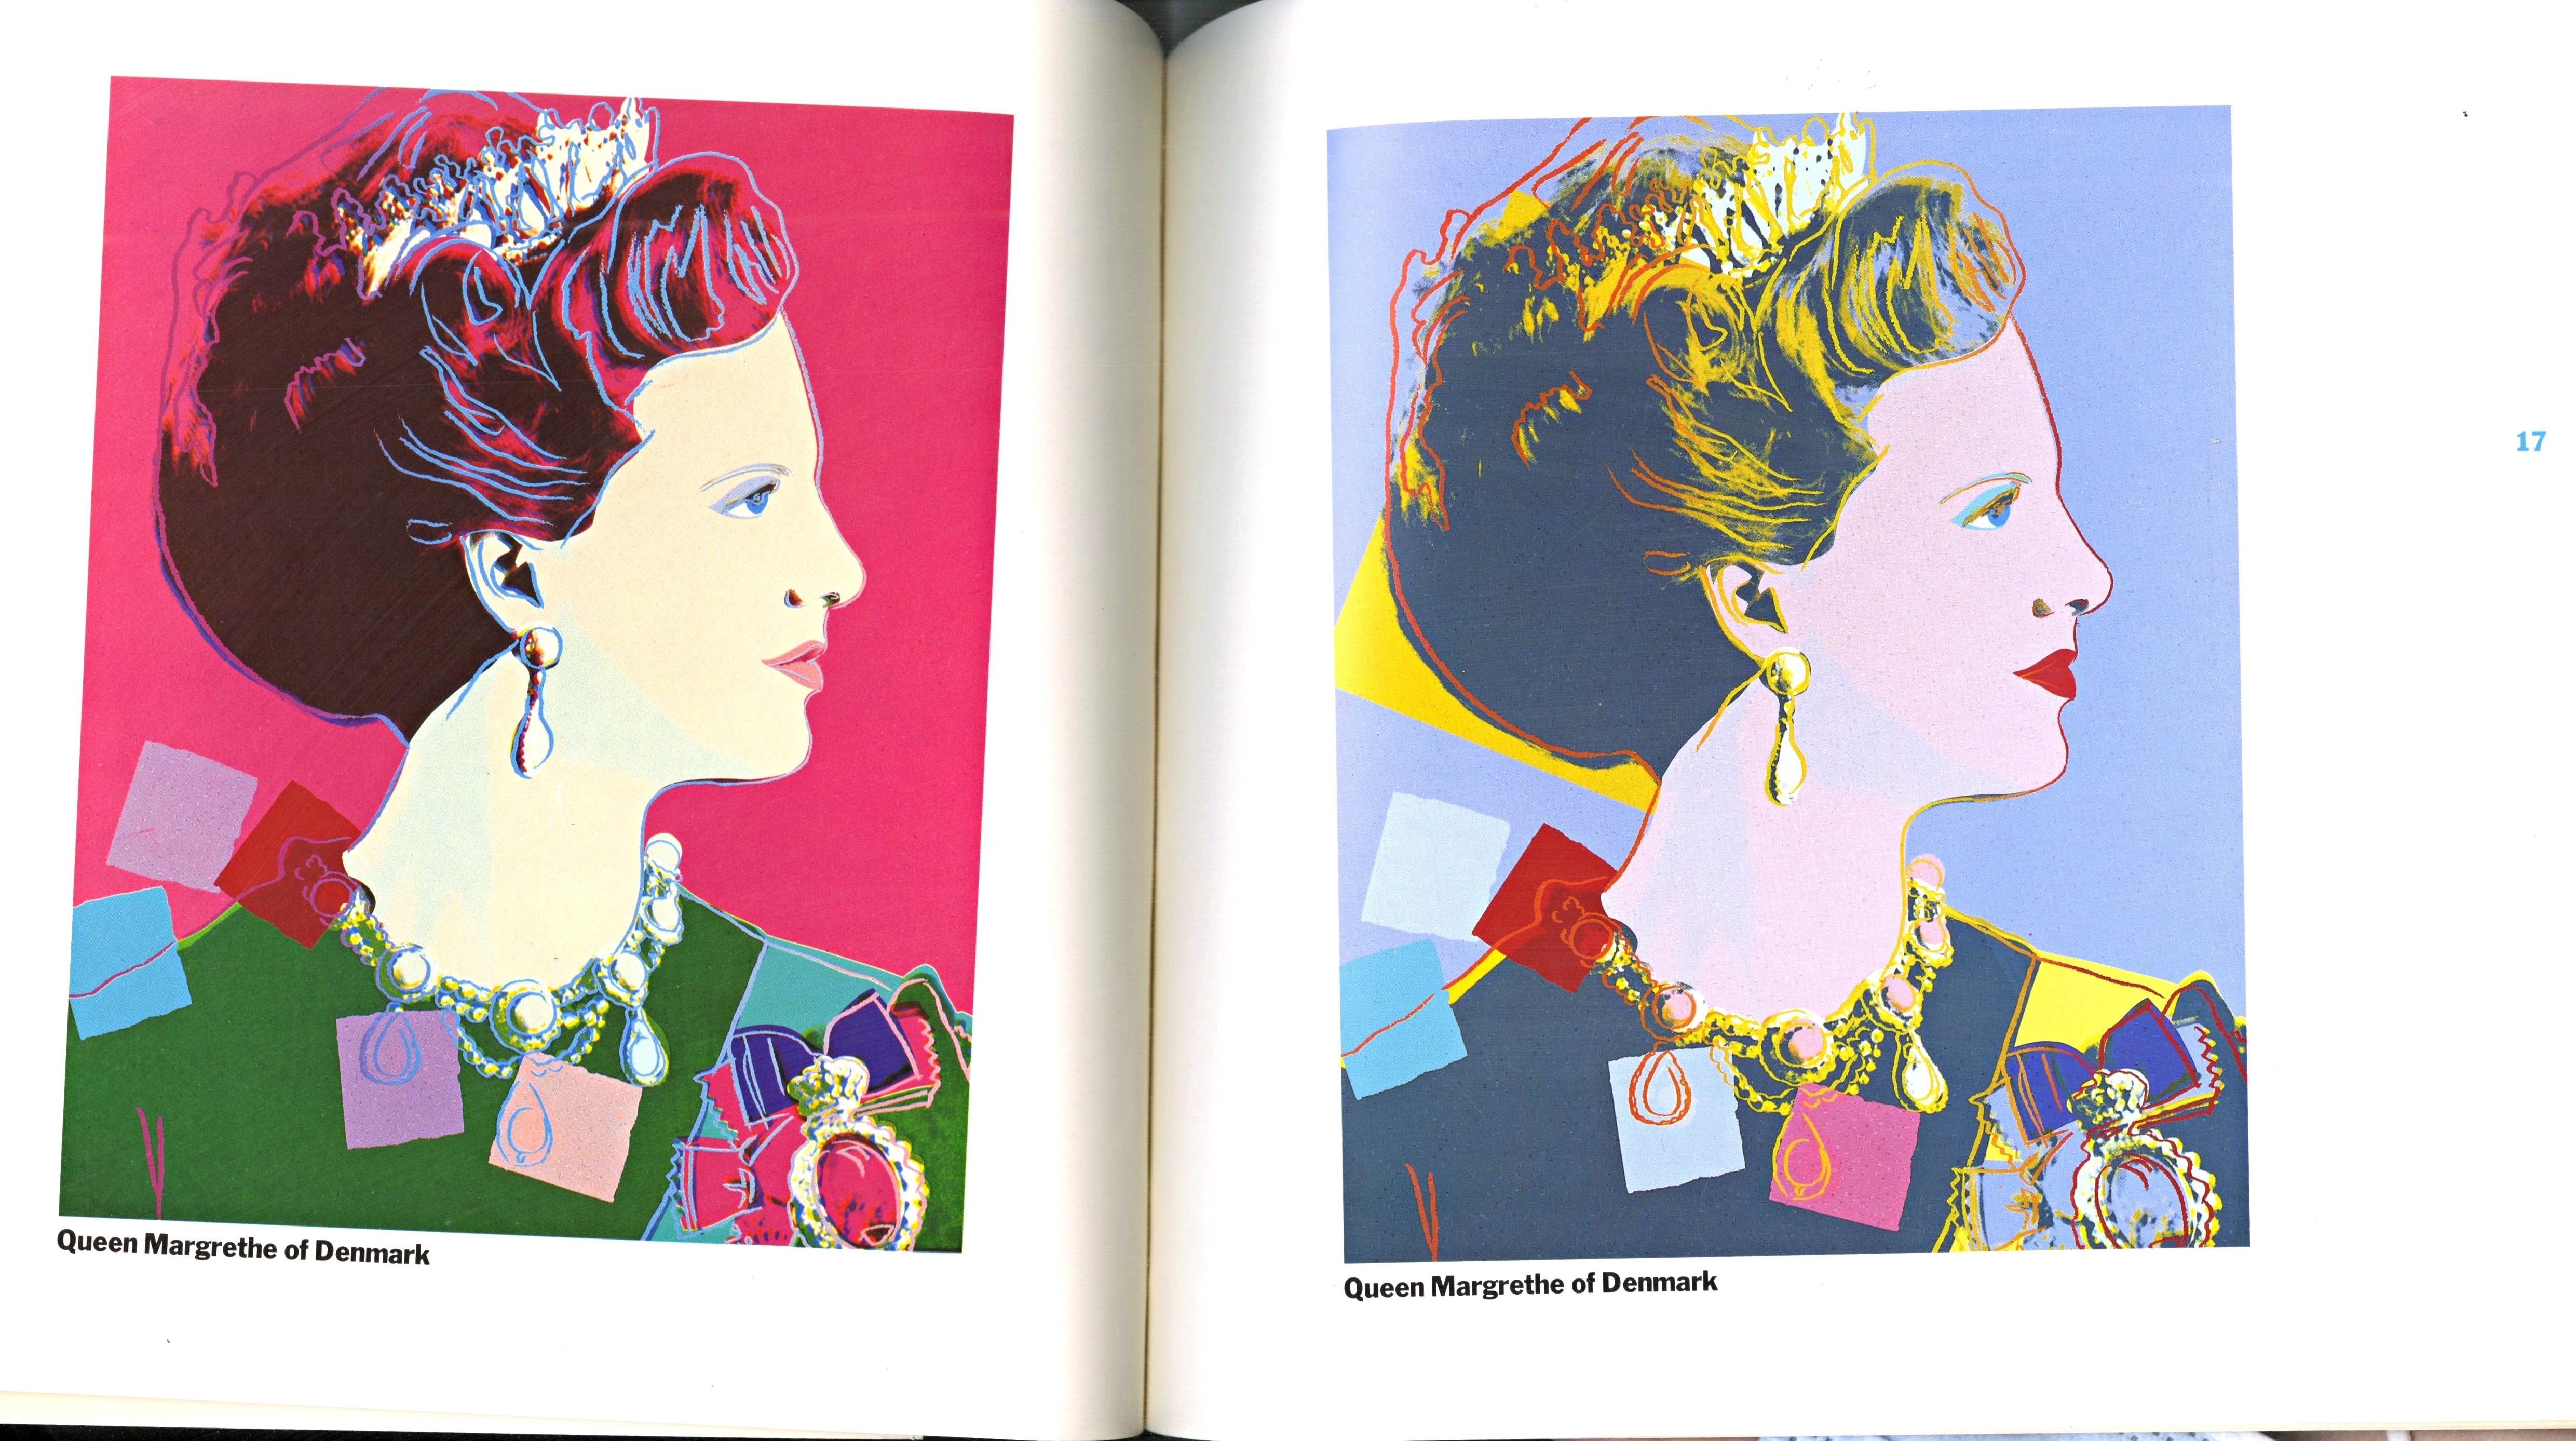 Andy Warhol
Reigning Queens (including Queen Elizabeth II) - lifetime edition, 1985
Limited Edition Numbered Exhibition Catalogue of offset lithograph plates, with Warhol's authorized plate signature. Lifetime edition.
9 1/2 × 9 inches
Edition